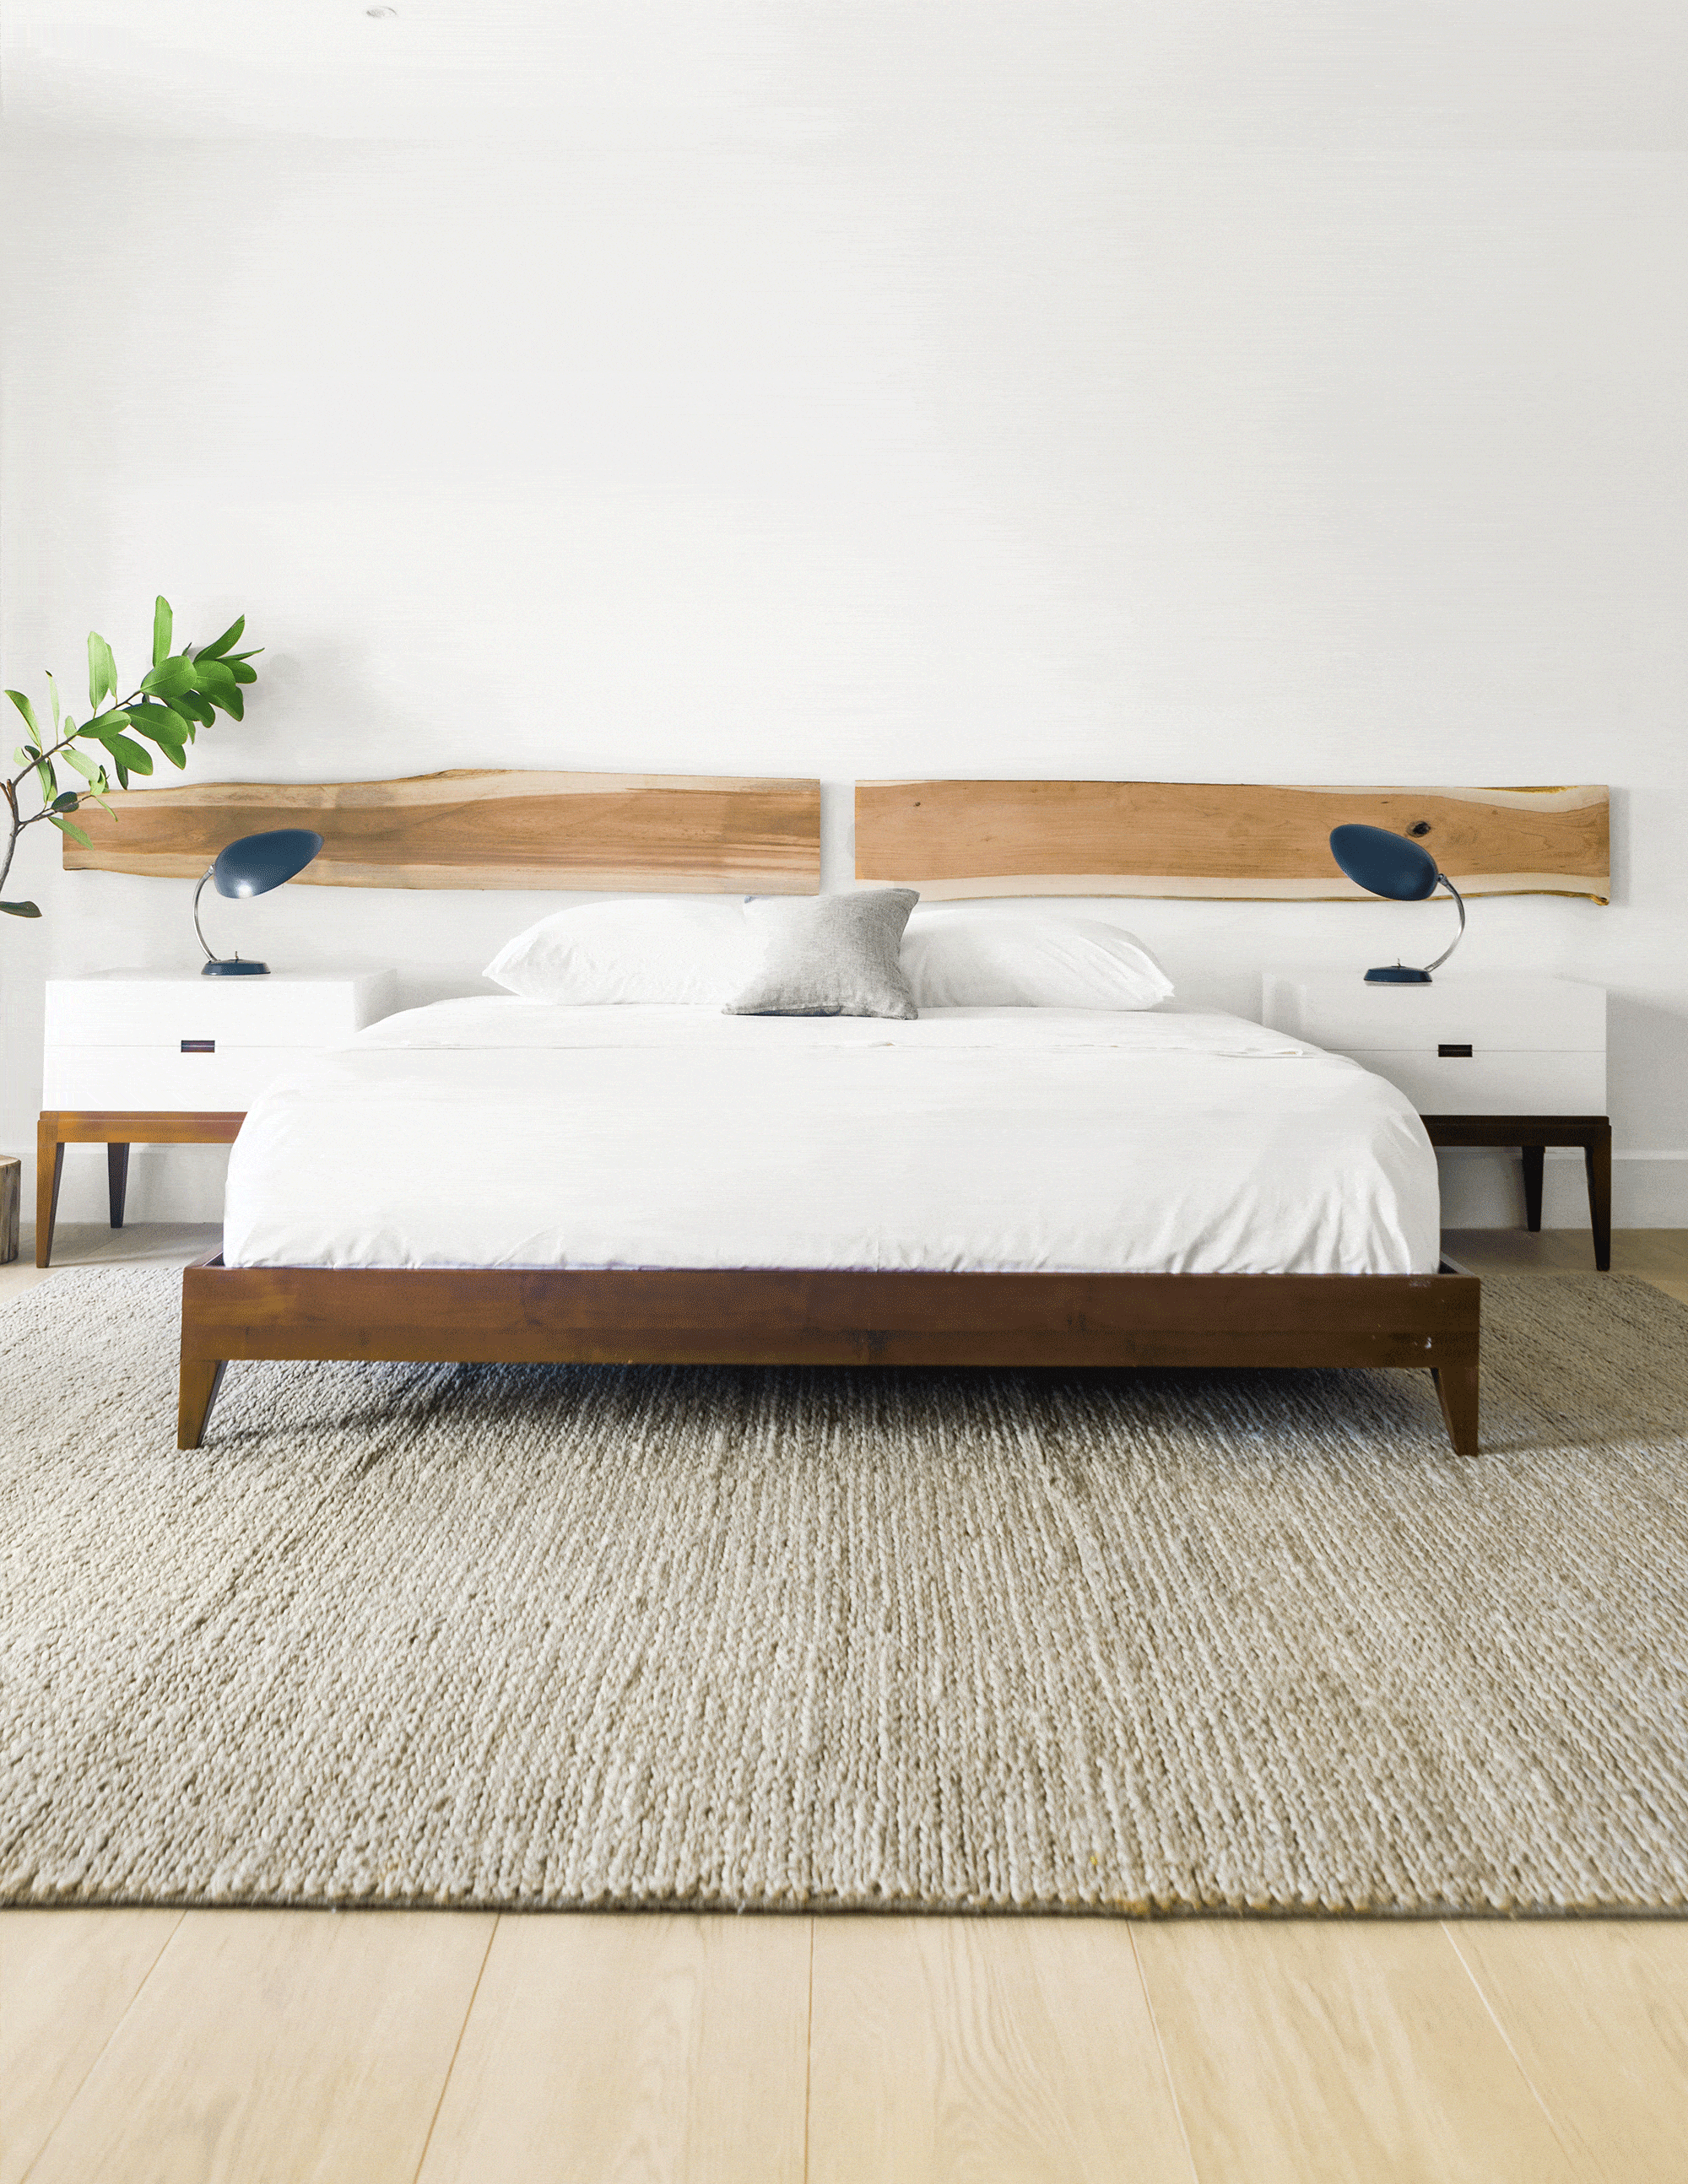 14 Rustic Bedroom Ideas, White Rustic Bed Frame